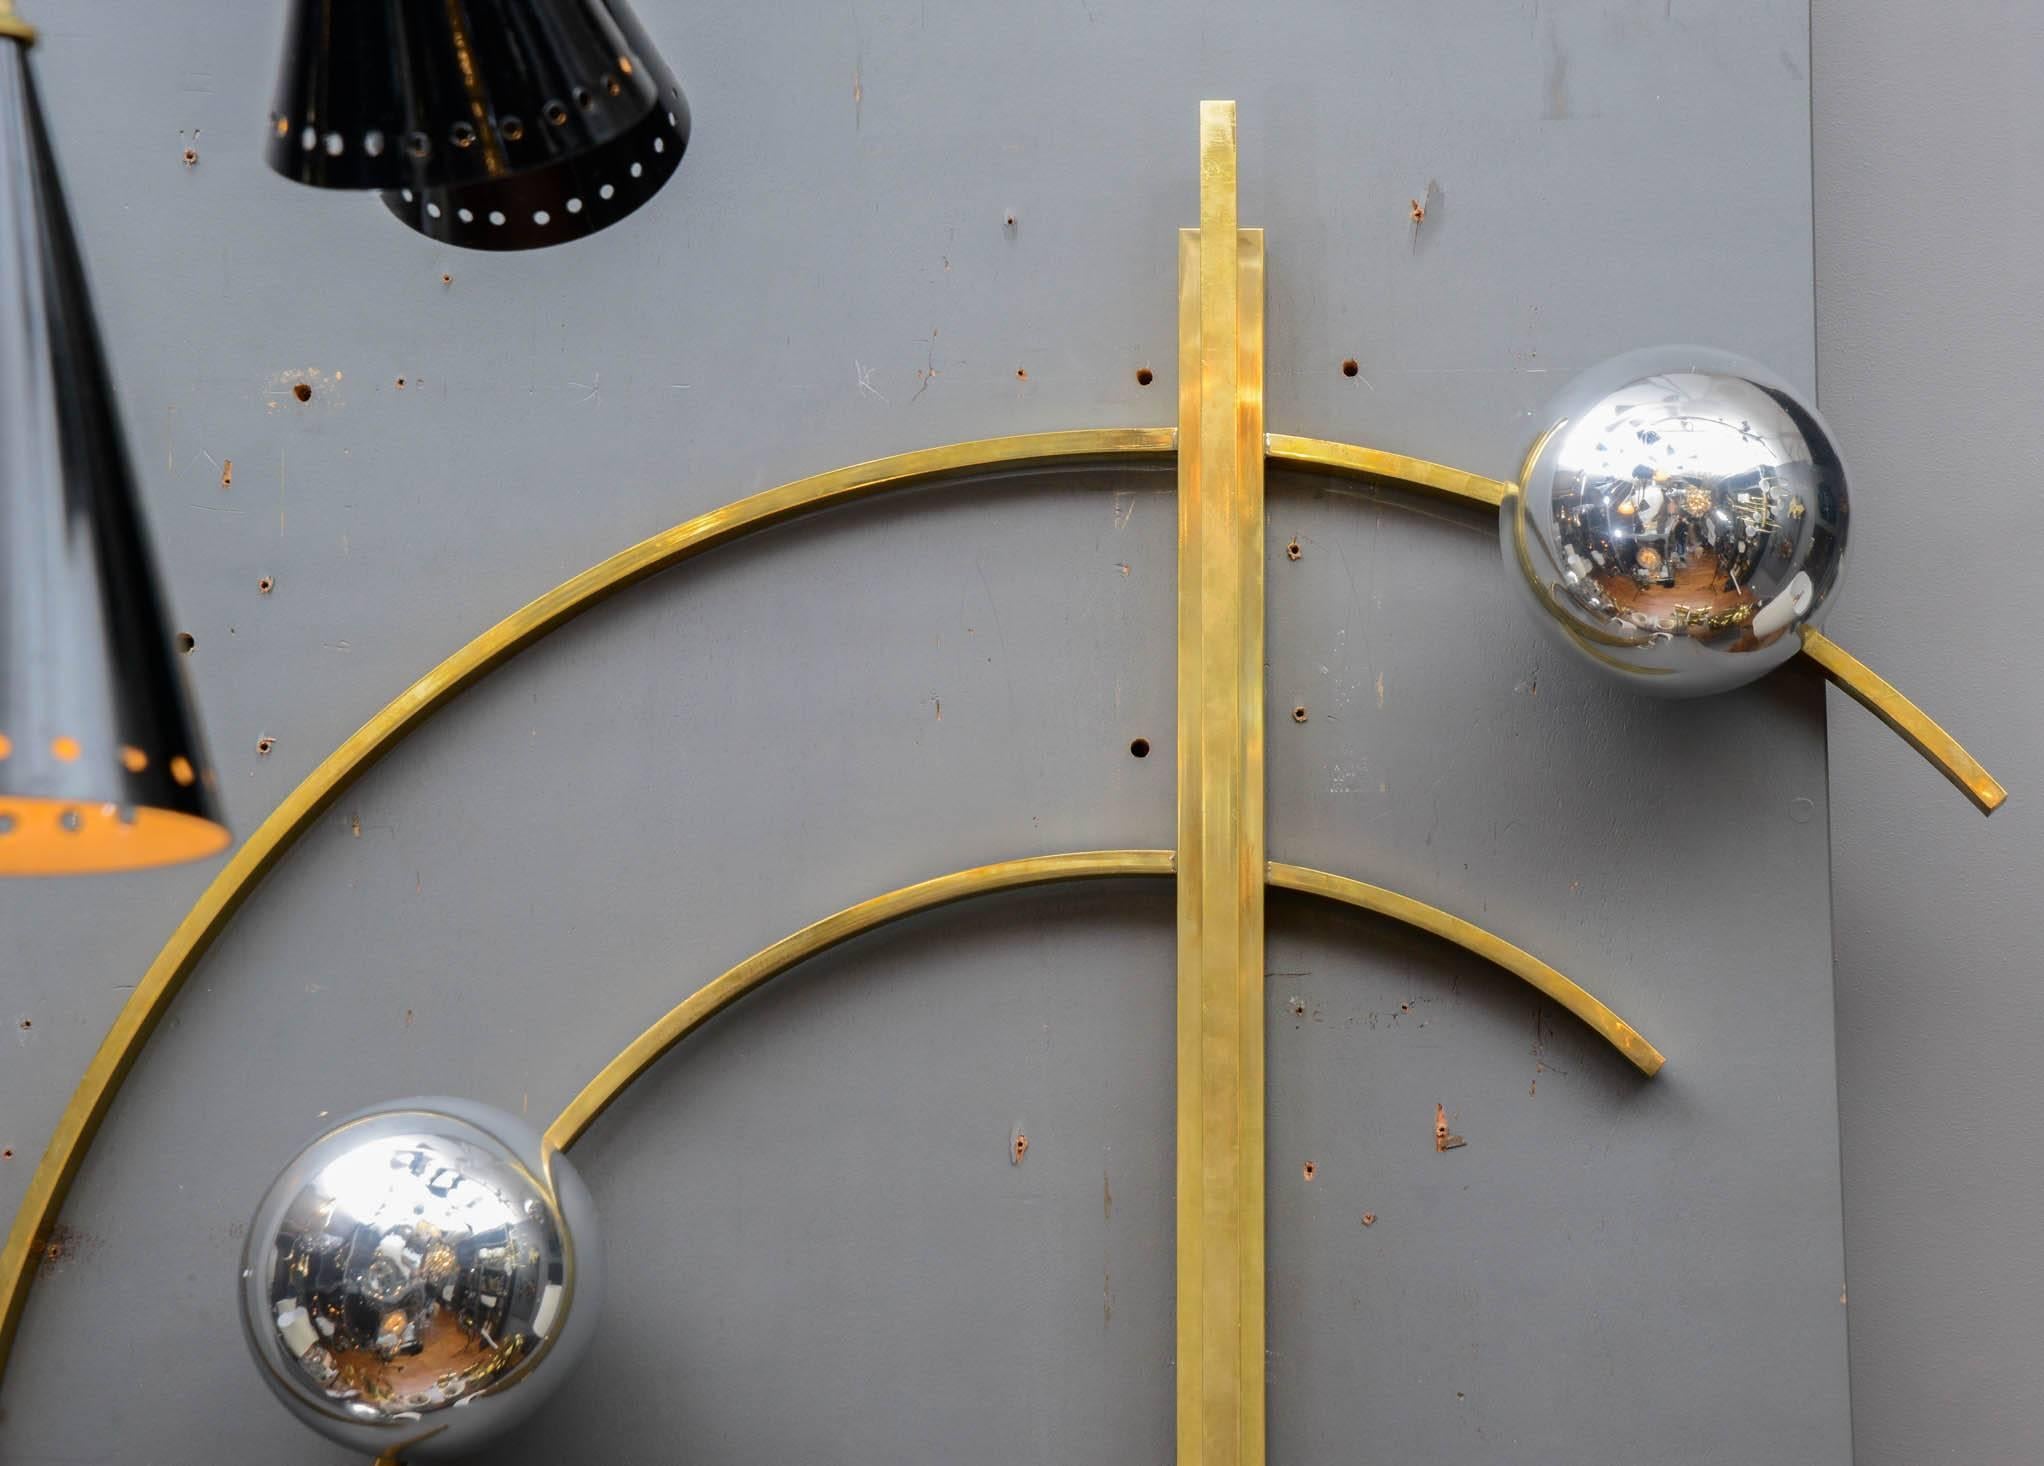 Wall sconces made of brass circular arms and three lights hidden in painted Murano glass globes.